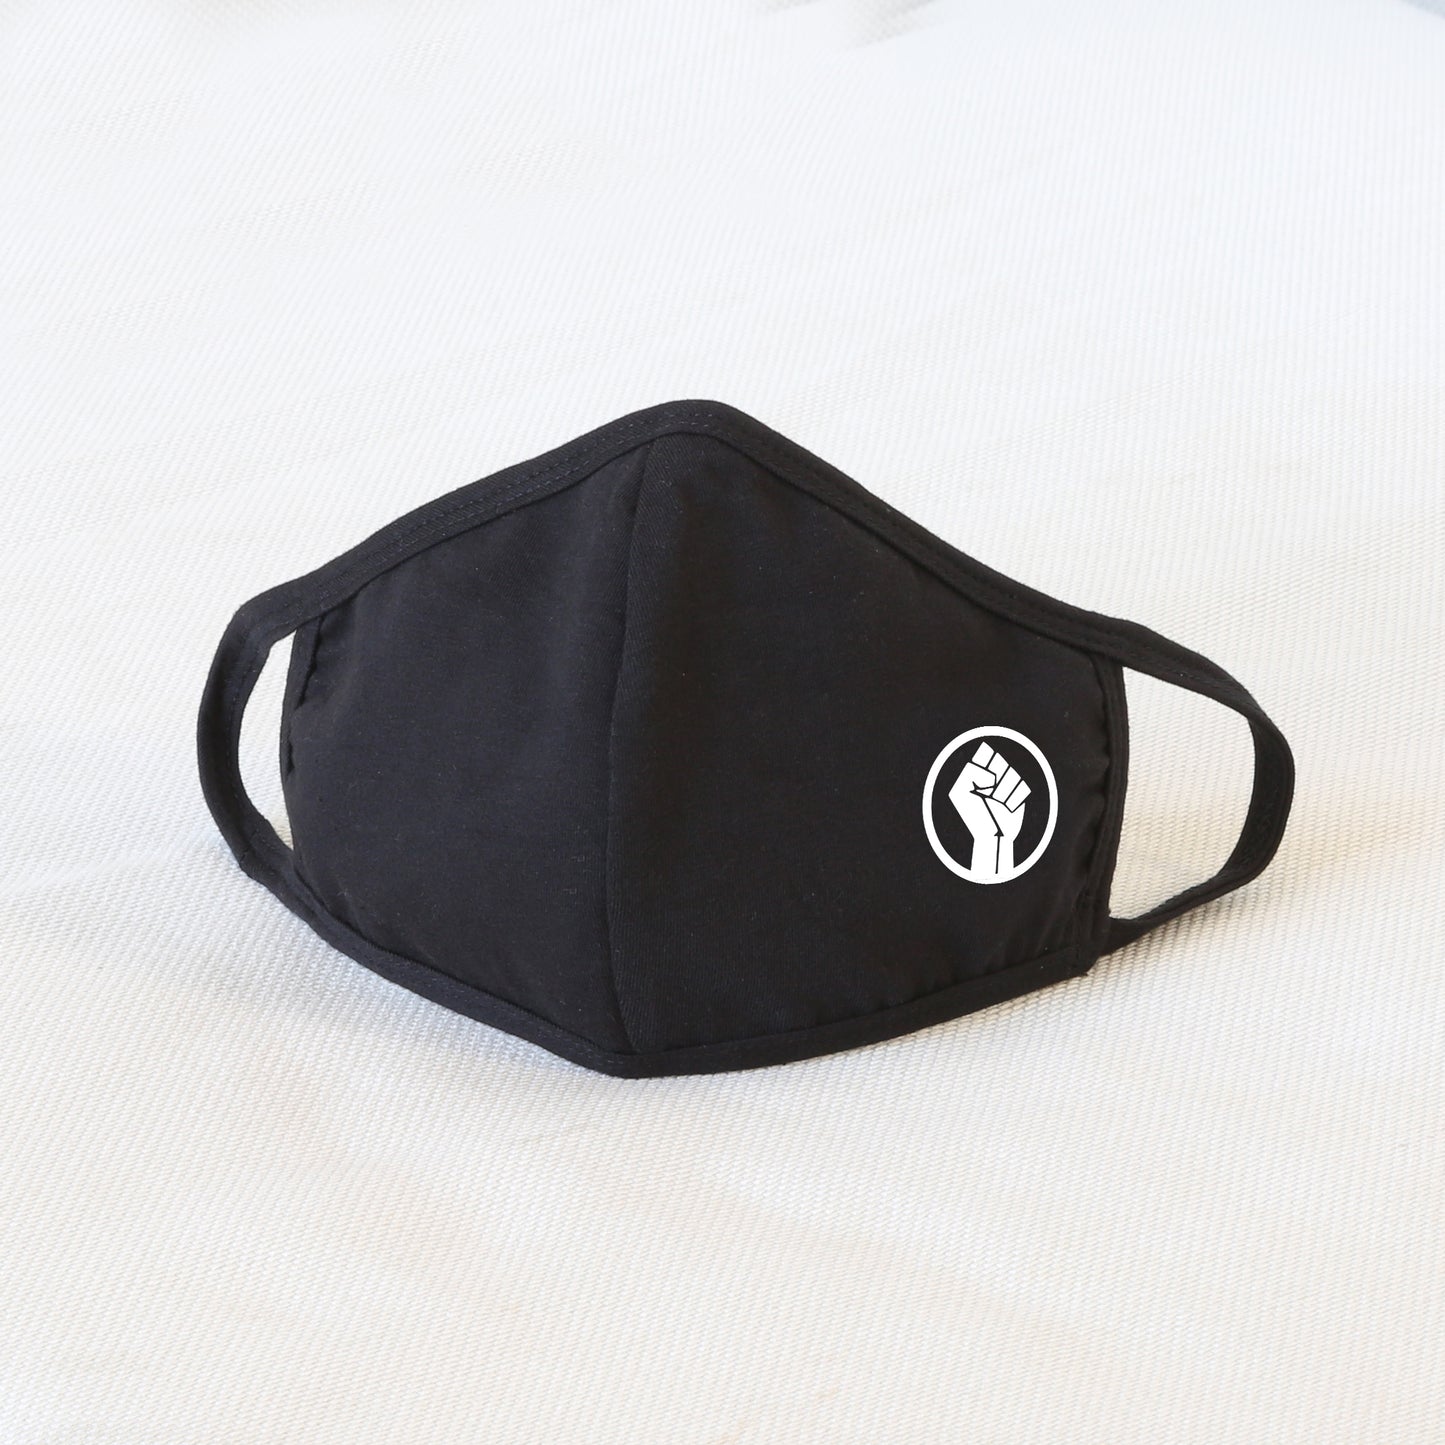 BLM Reusable Cloth Face Mask Covering, Black Lives Matter Fist Logo 2-Layer Cotton Outdoor Mask